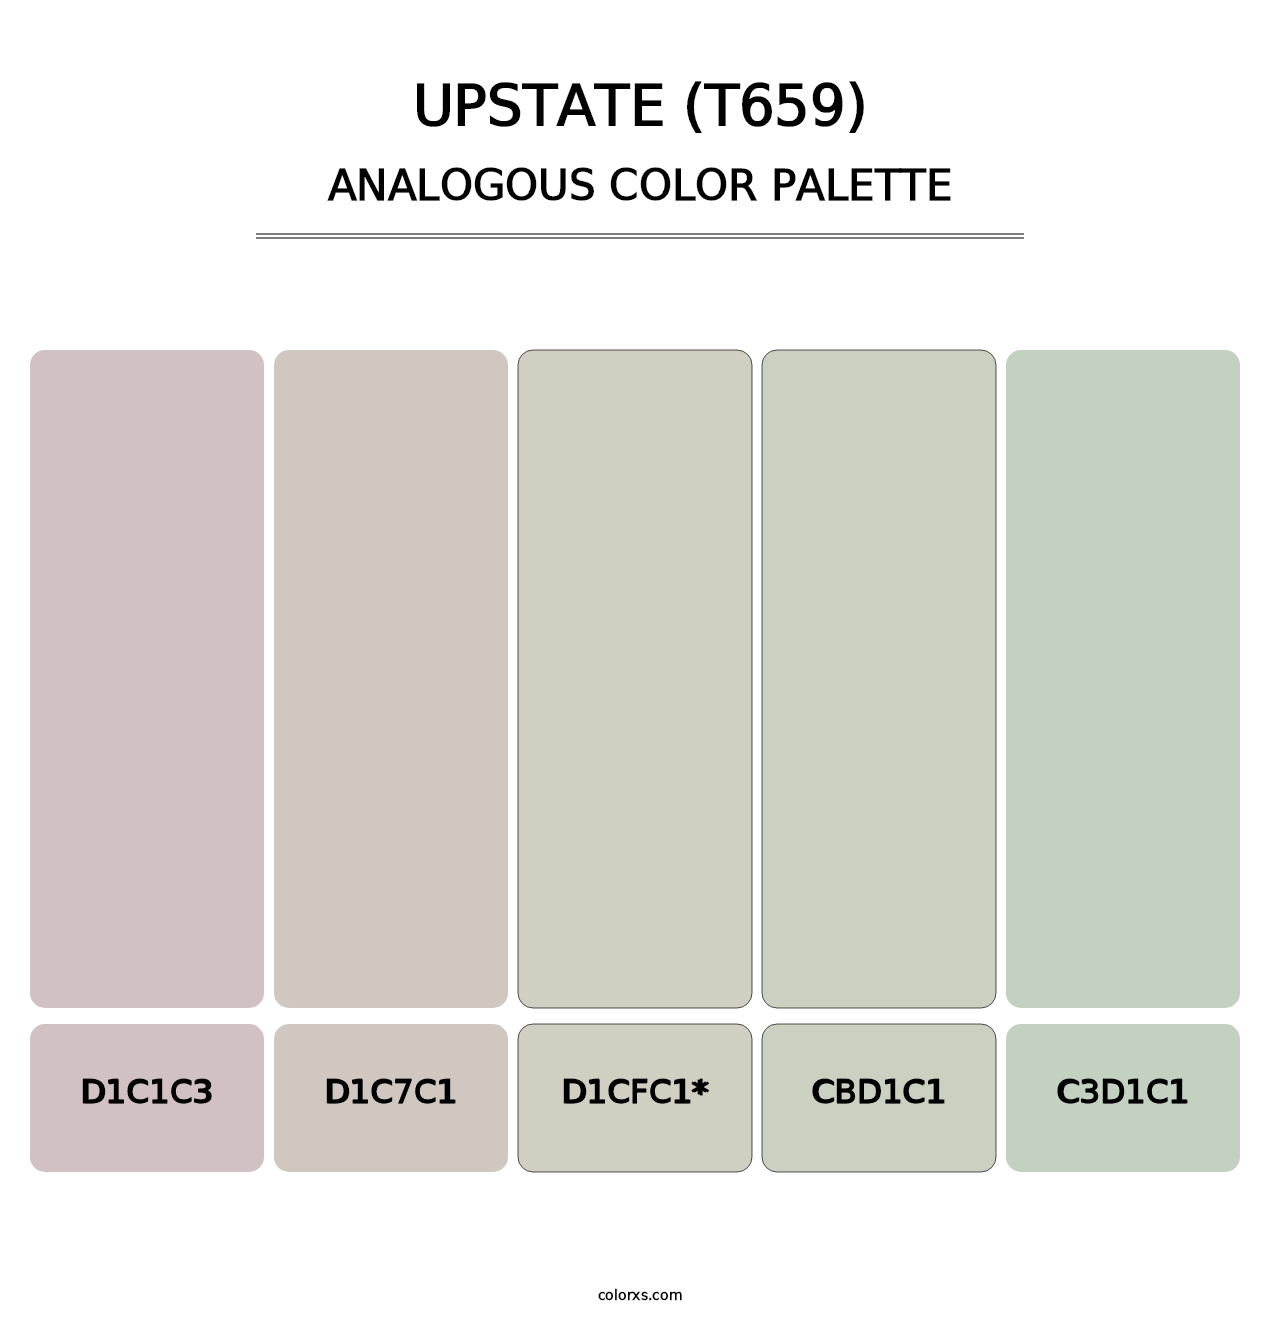 Upstate (T659) - Analogous Color Palette